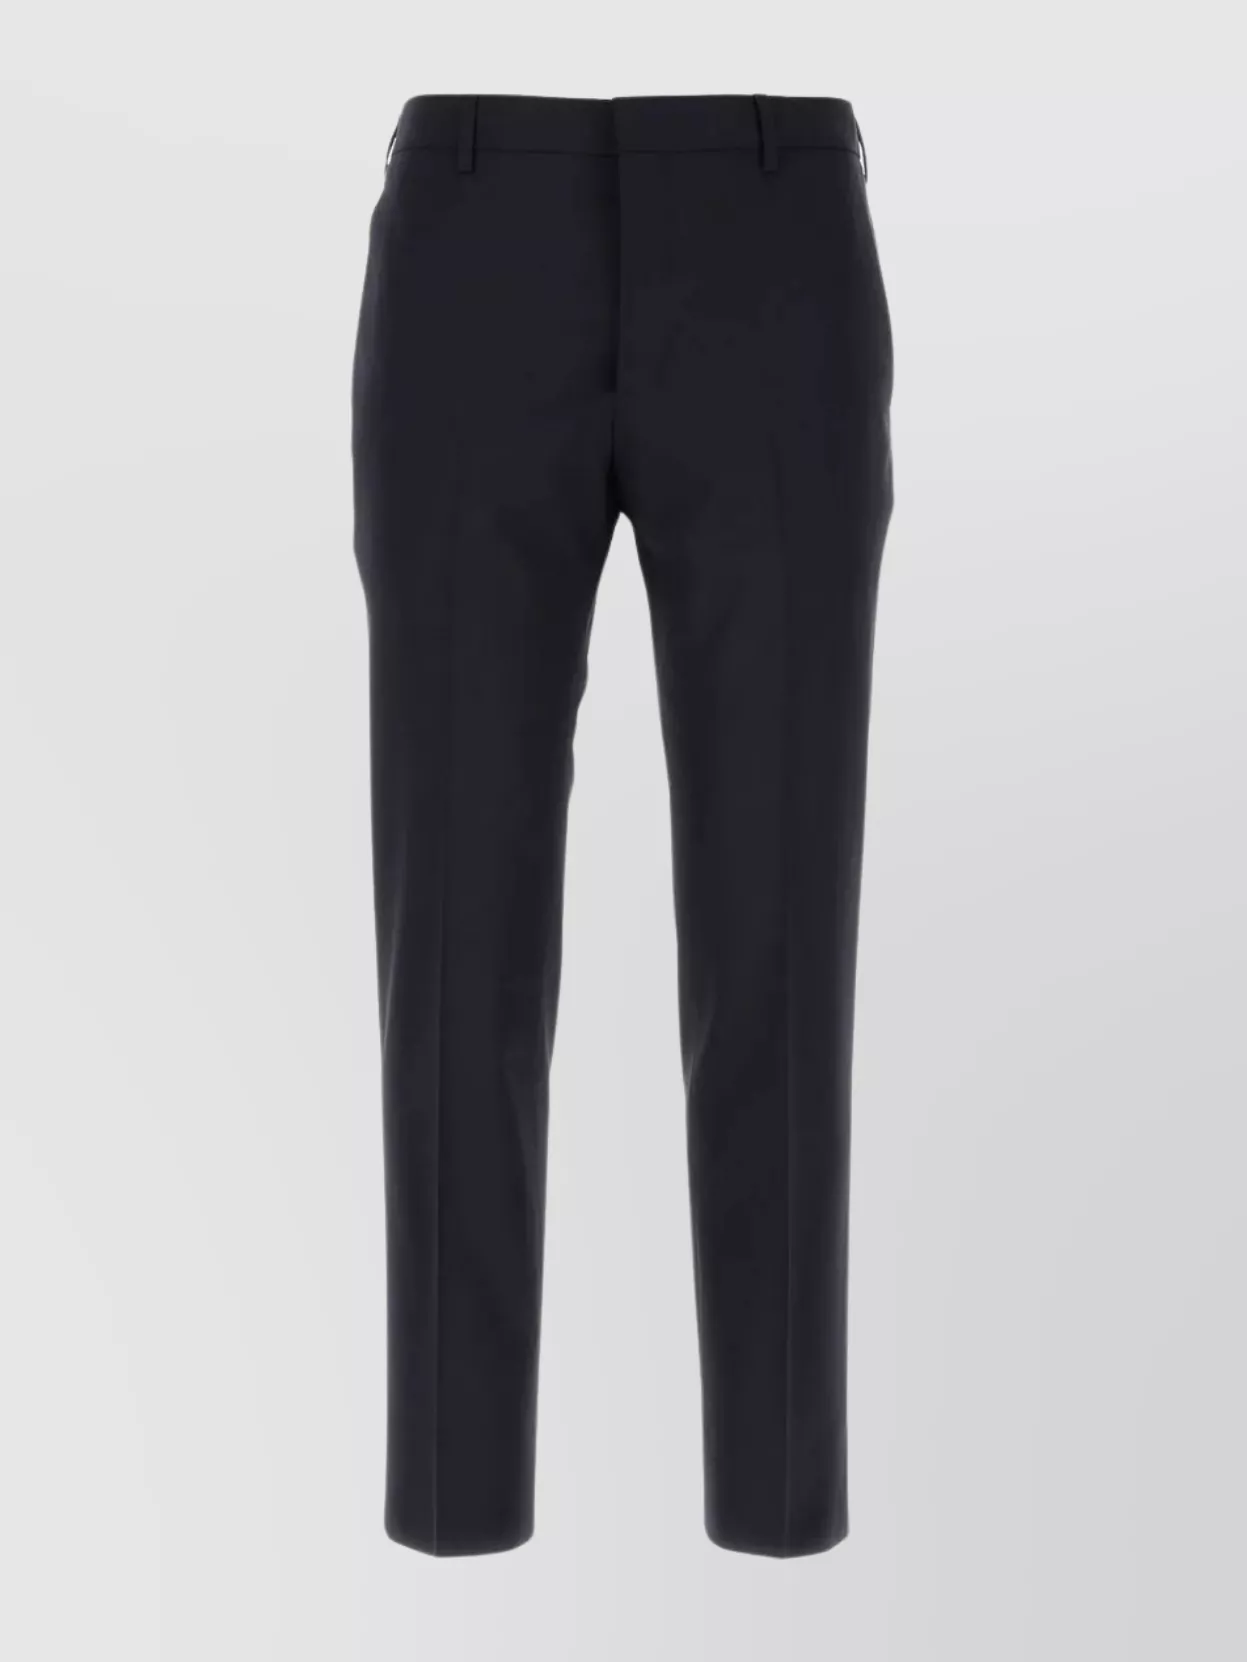 Shop Prada Tailored Wool Trousers With Belt Loops